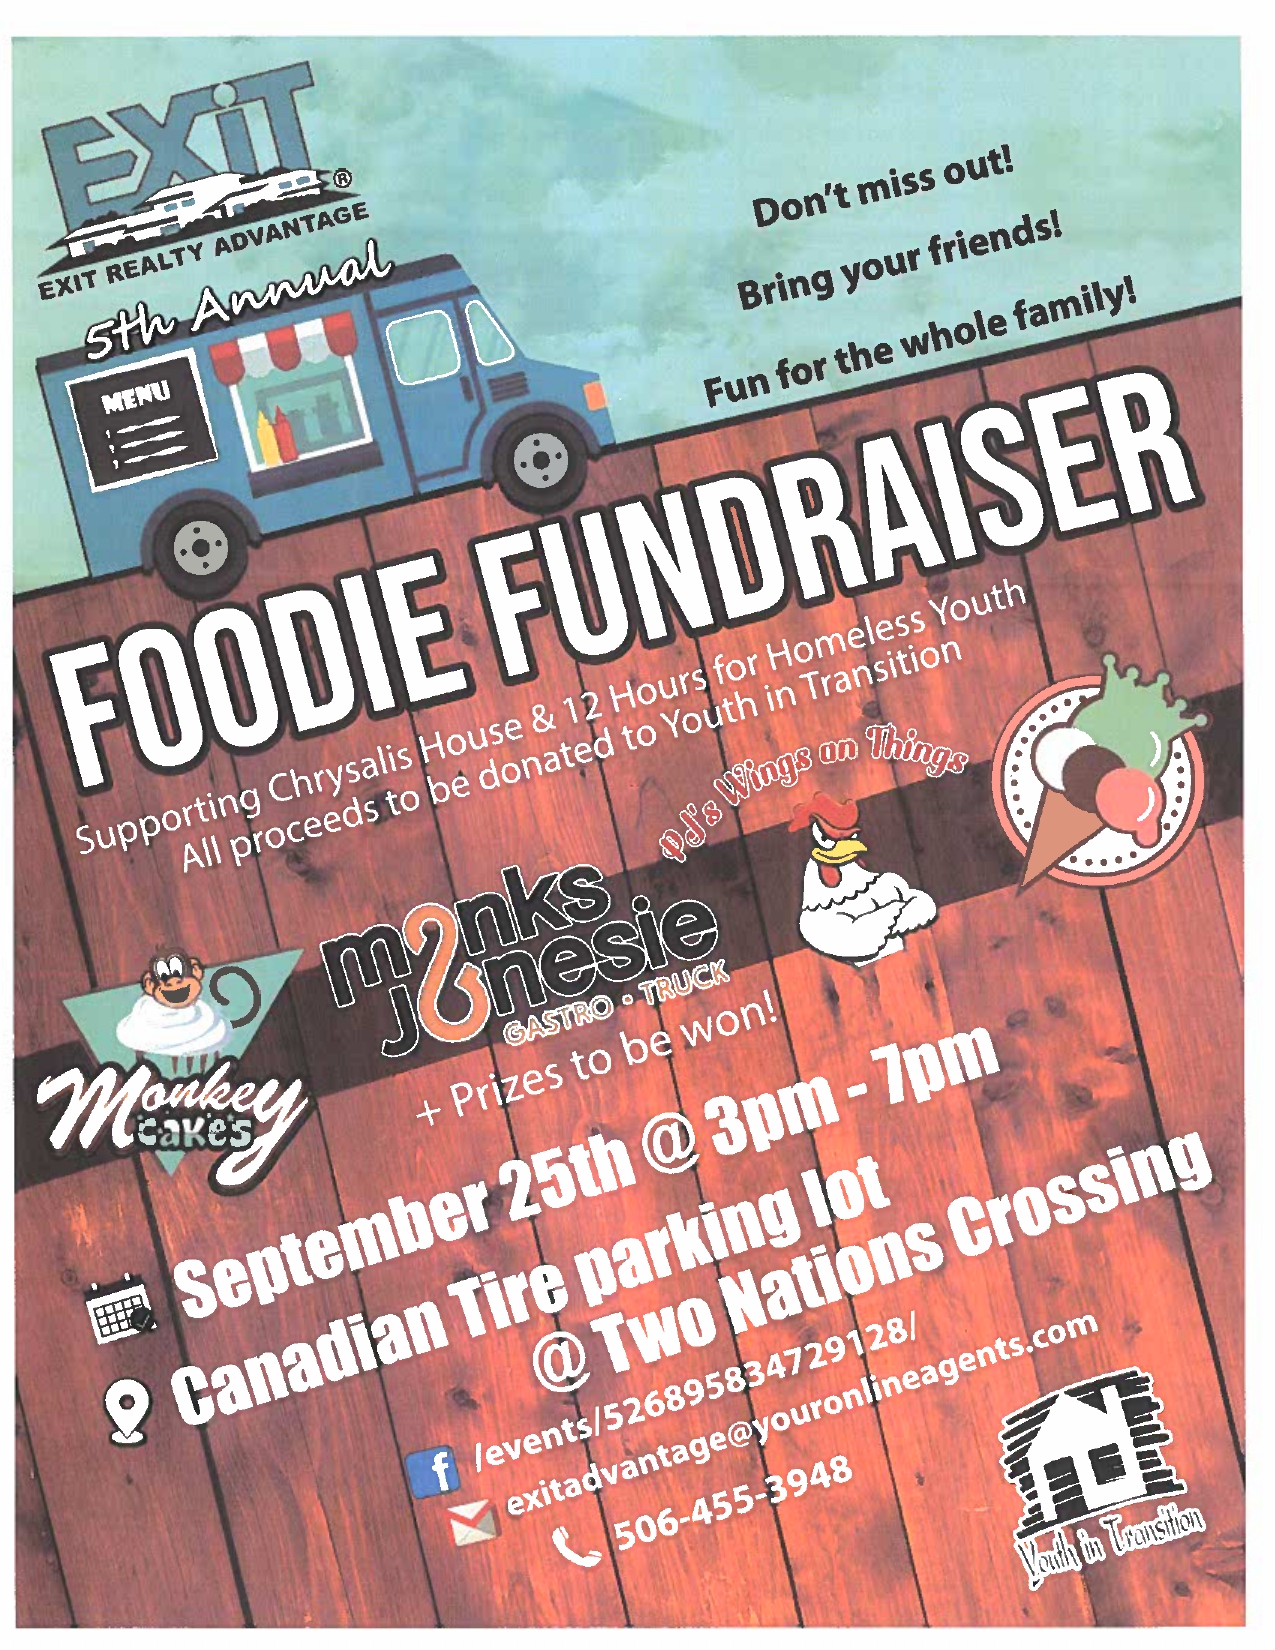 Foodie Fundraiser - Exit Realty Advantage 